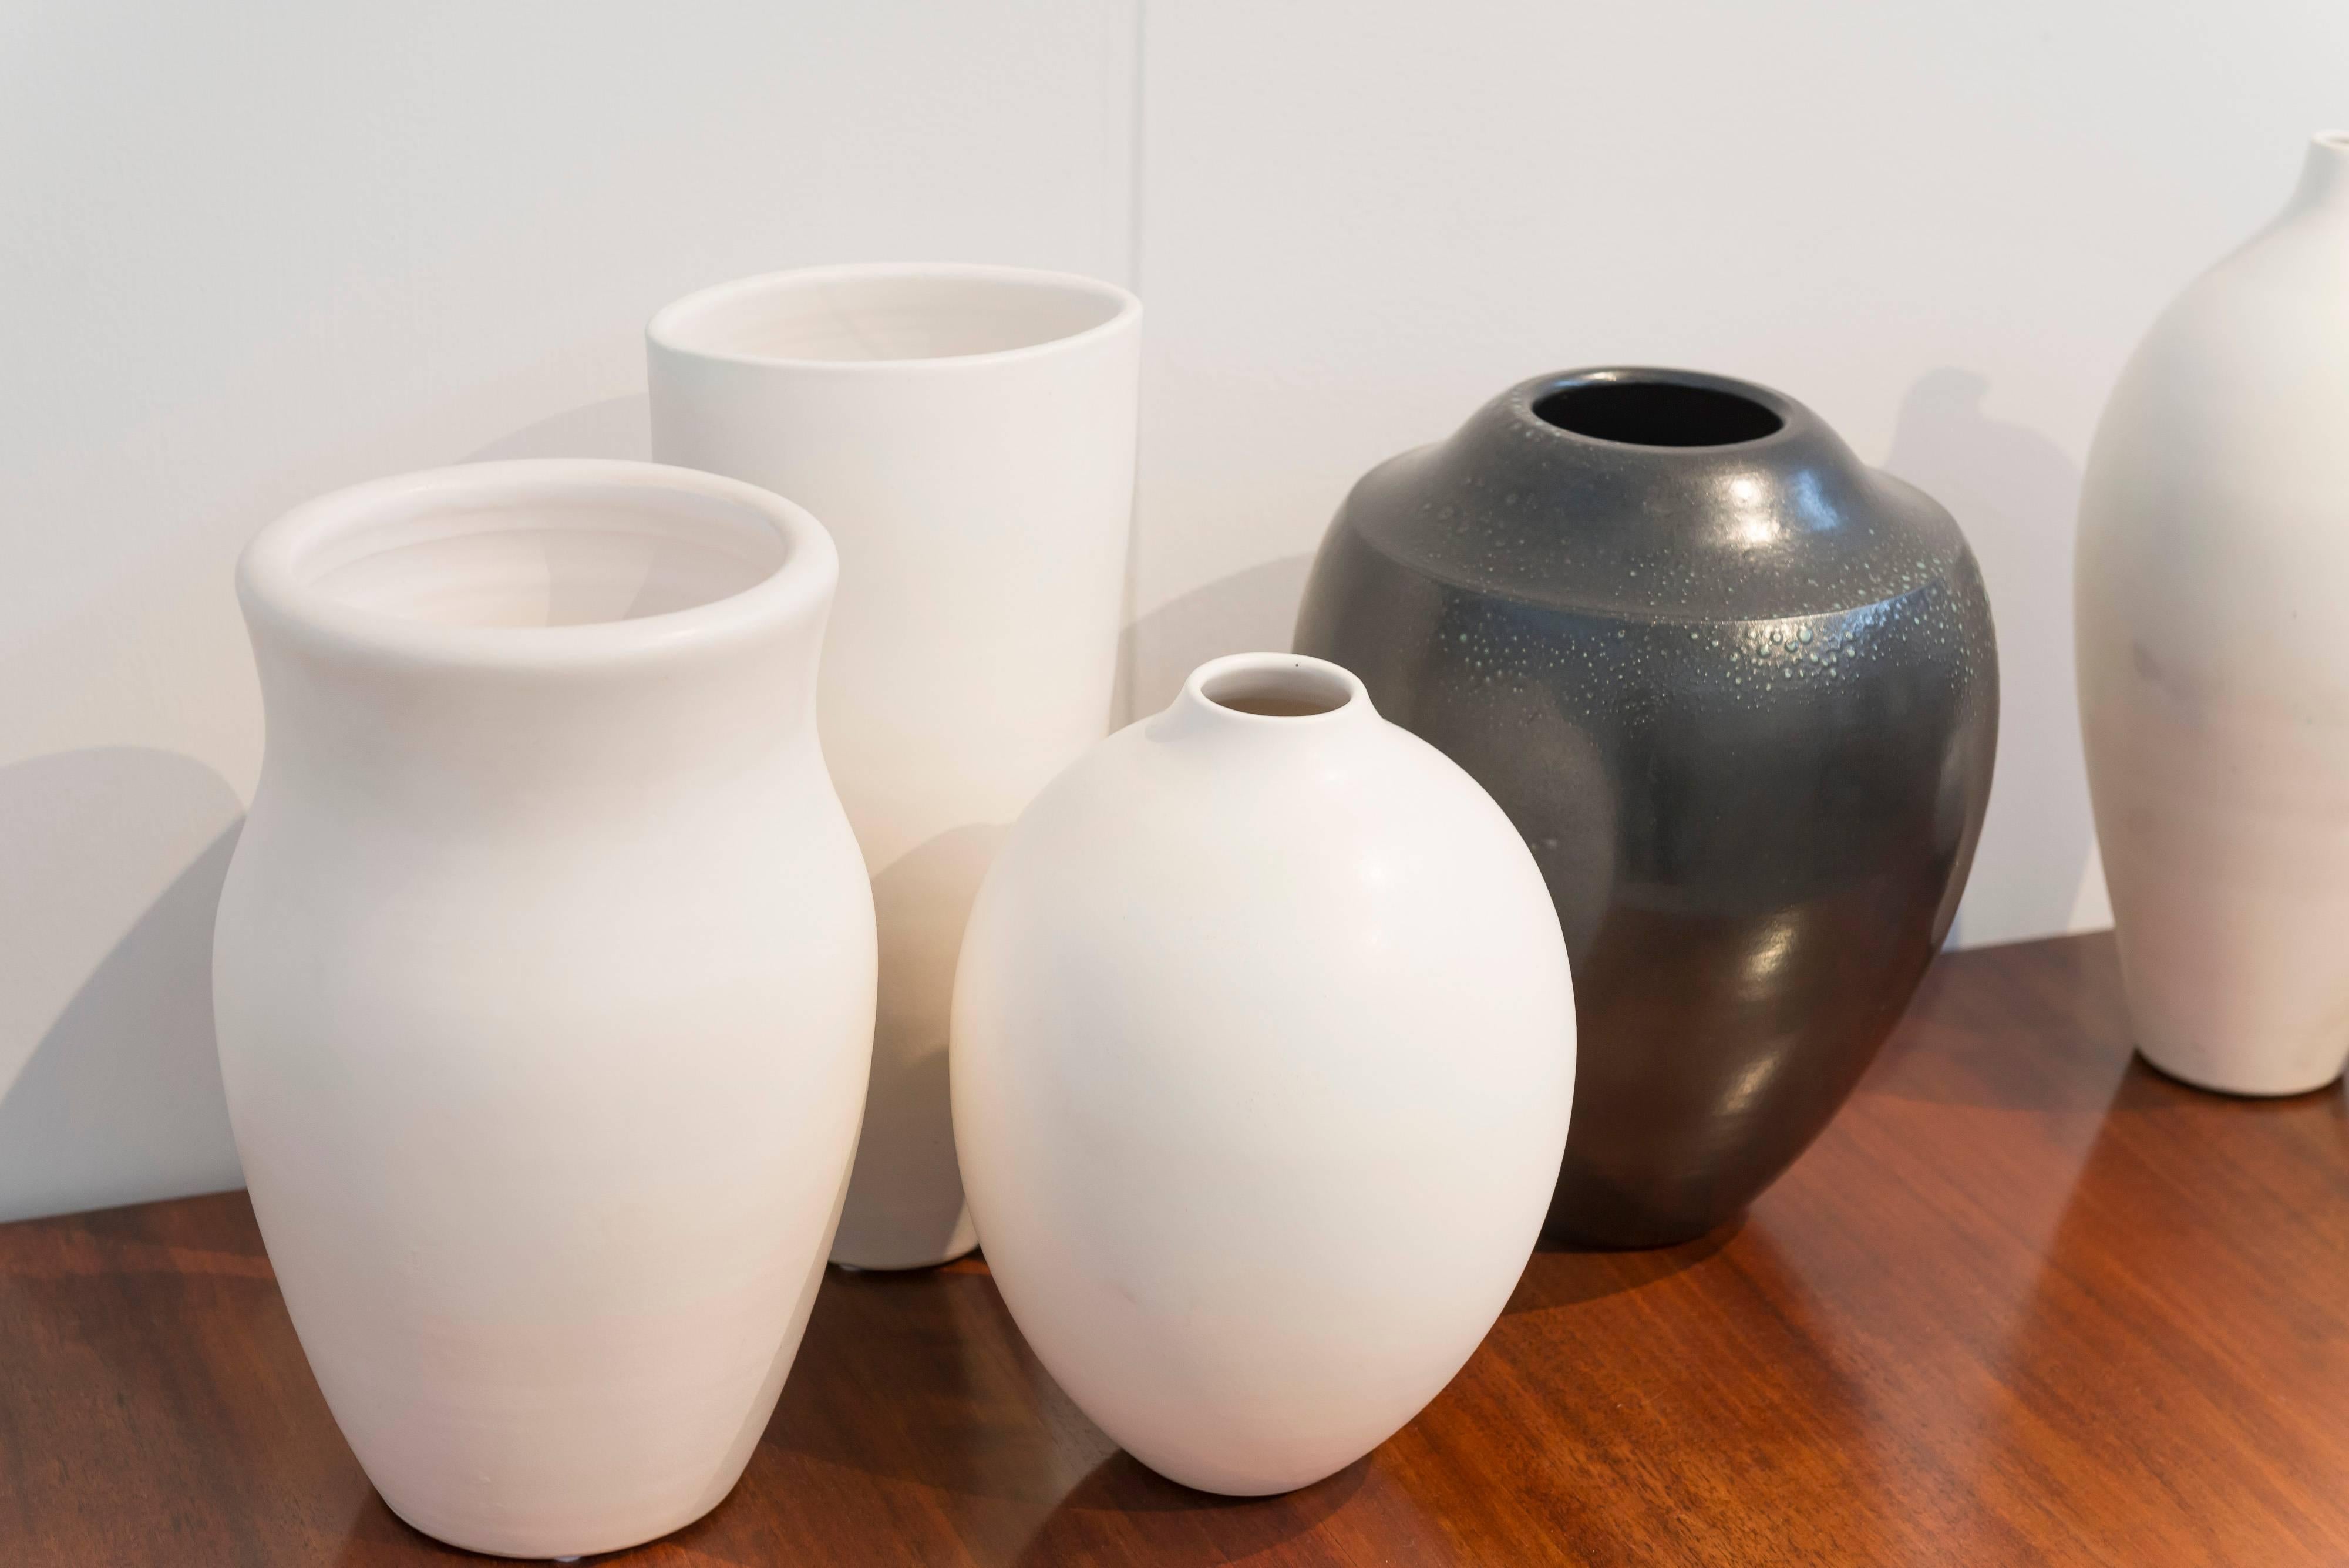 Six ceramic vases by Suzanne Ramie in various sizes and shapes.
Priced and sold individually.
Madoura, France, circa 1950-1960.